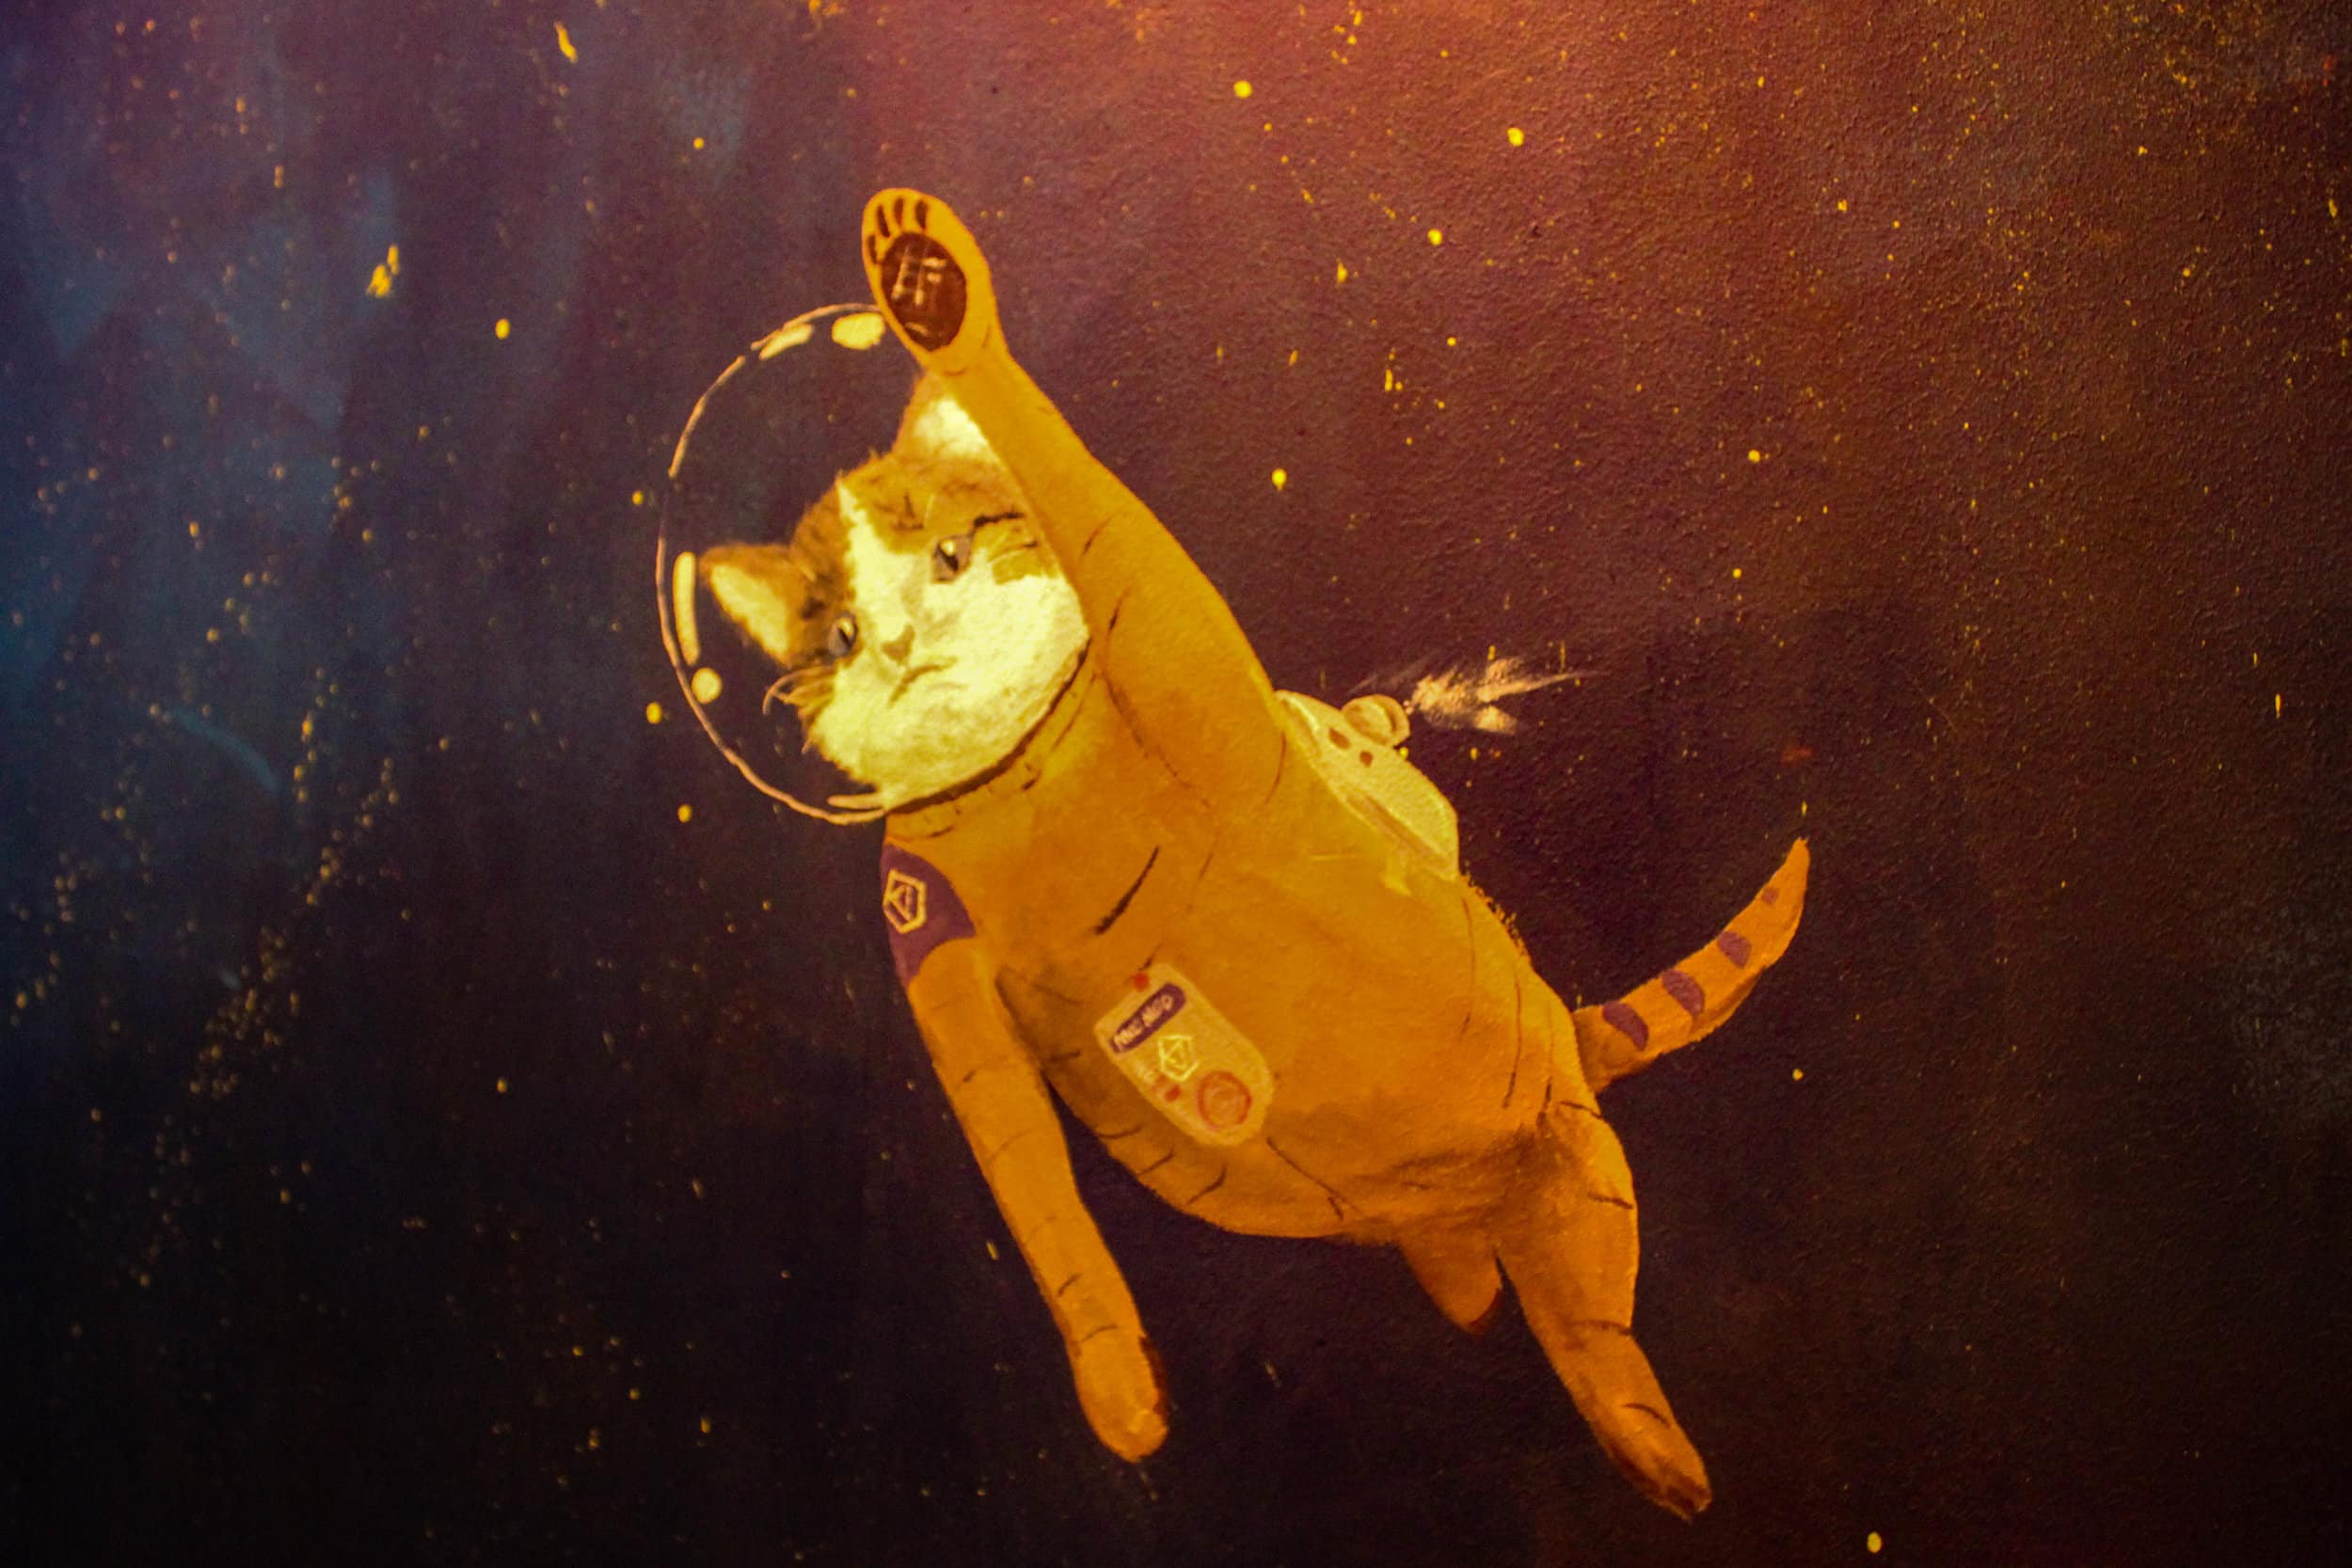 Along the walls leading up to the second floor there were cats painted as astronauts.